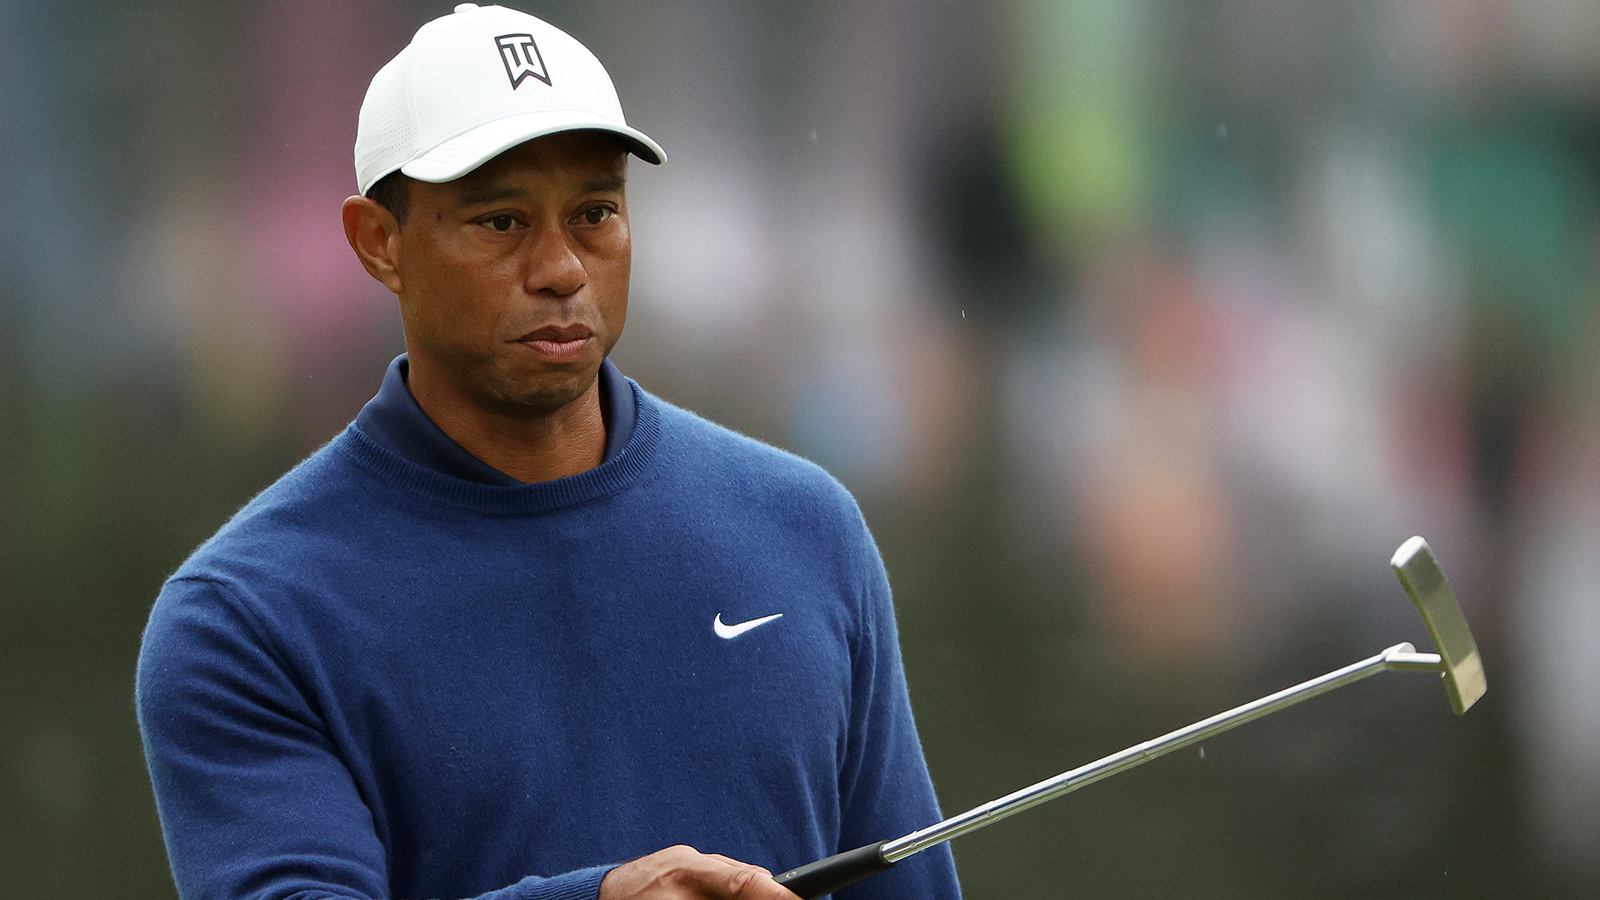 Jaguars Employee Bought Tiger Woods' Putter With Stolen Funds